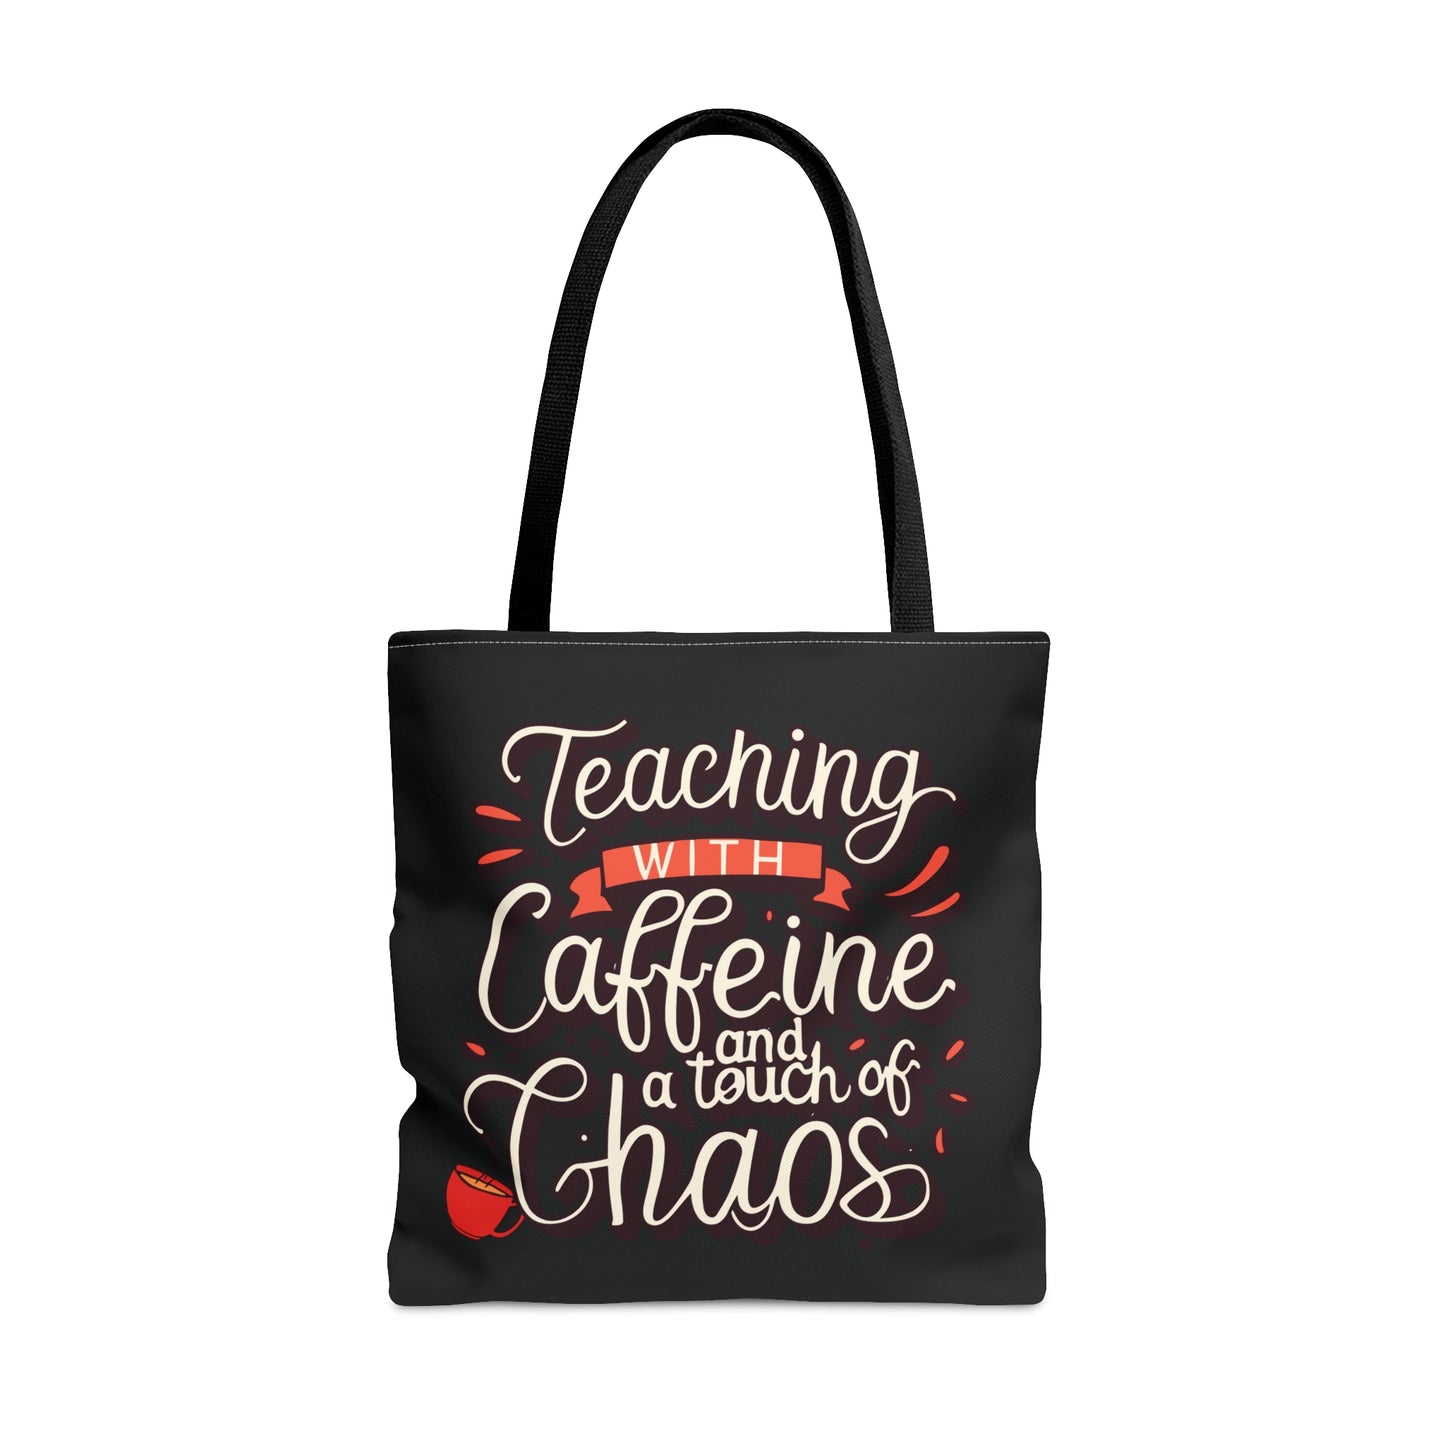 Teacher Tote Bag -"Teaching with Caffeine and a Touch of Chaos"